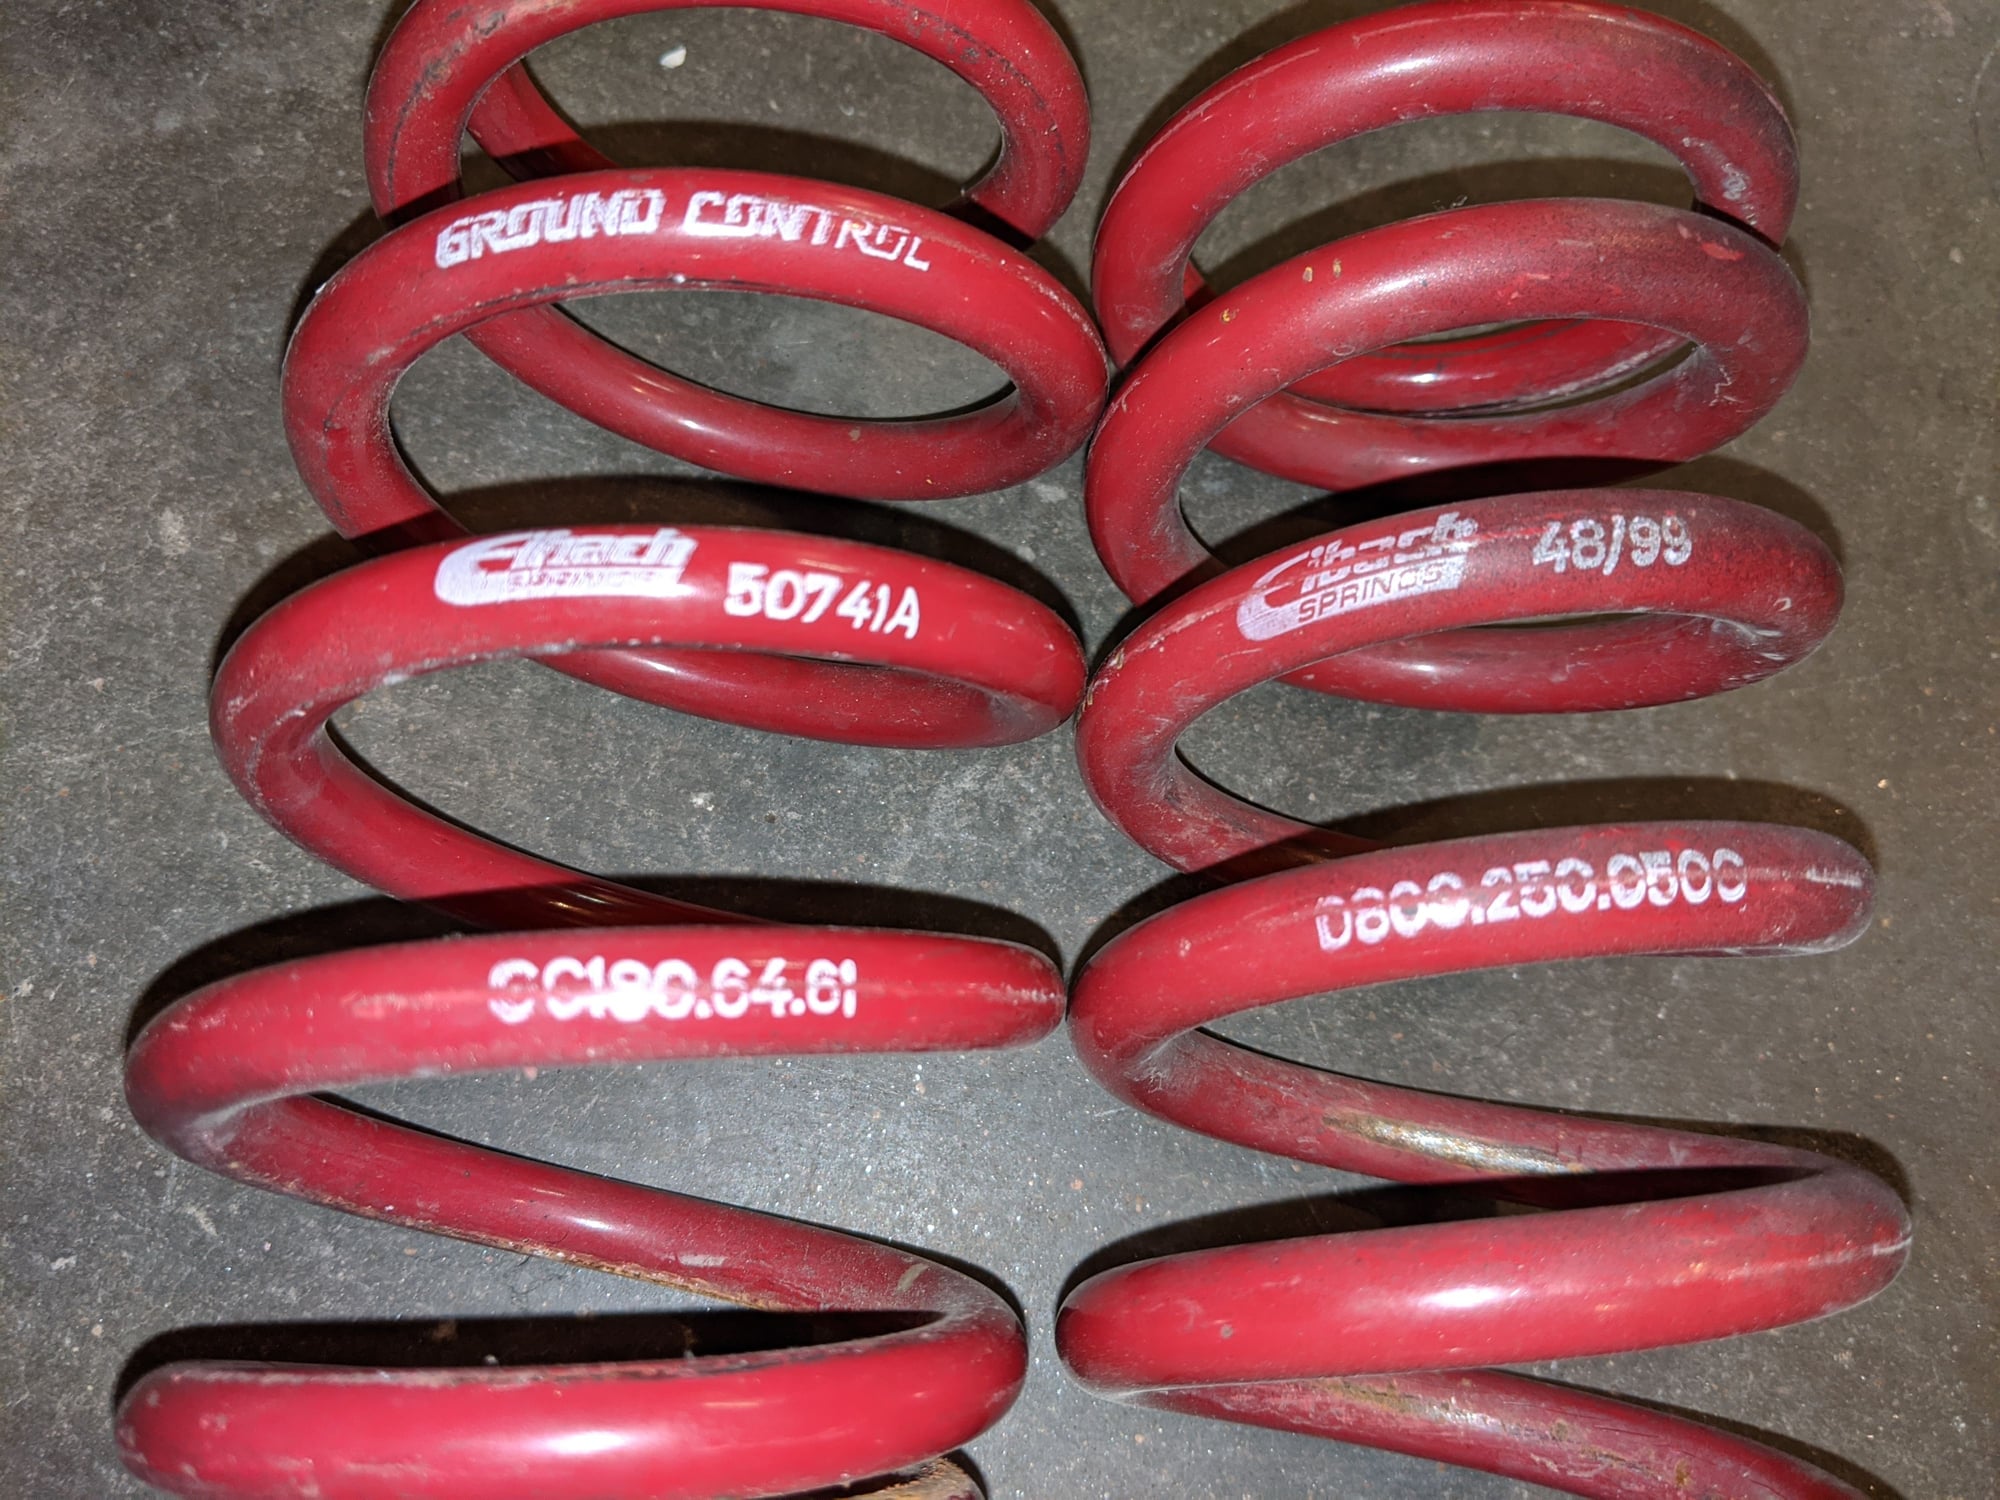 Steering/Suspension - 2.5 Coilover Springs Ground Control Eibach - Used - 1992 to 2002 Mazda RX-7 - Broken Arrow, OK 74012, United States